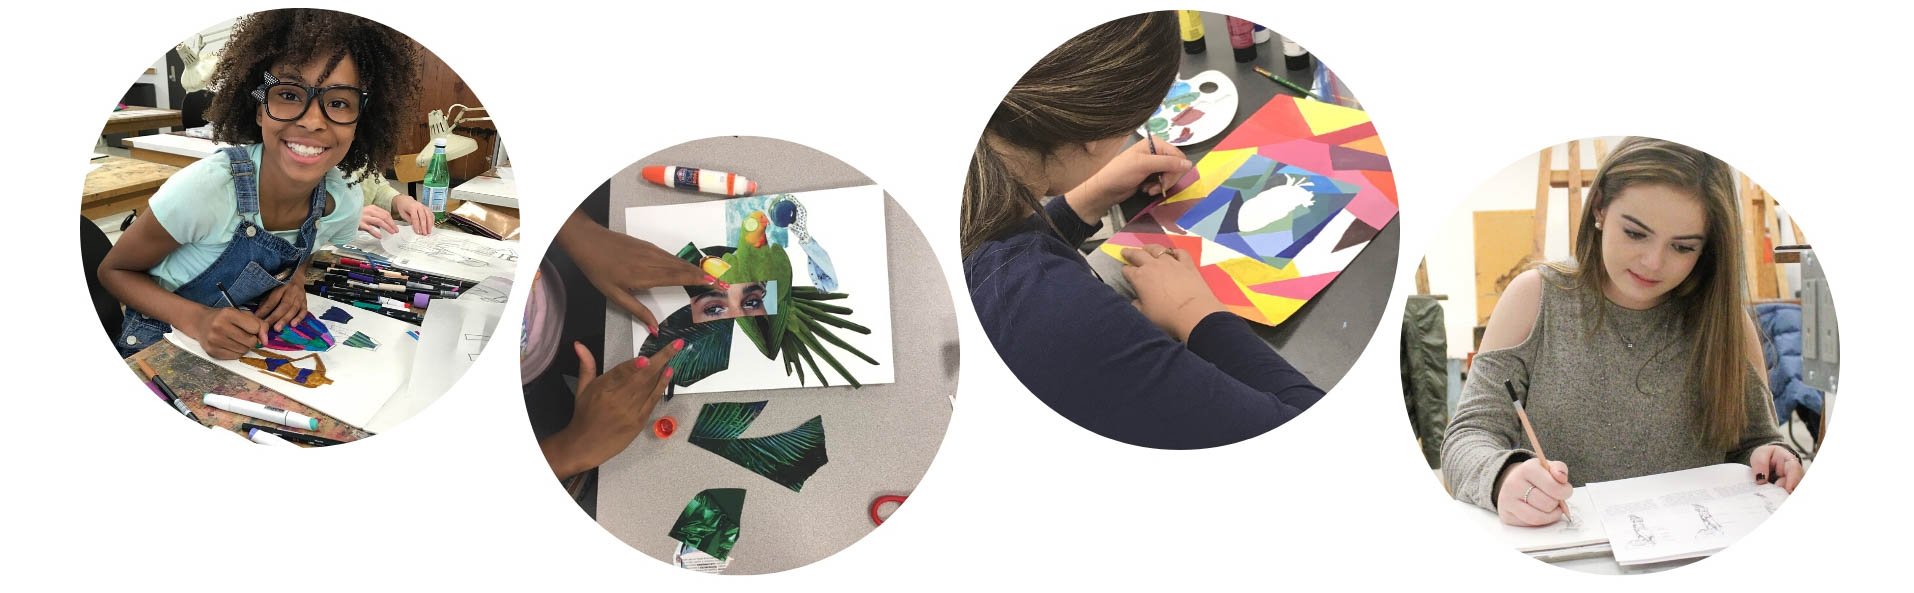 Middle school students working on art projects: collage, colorwheel, painting